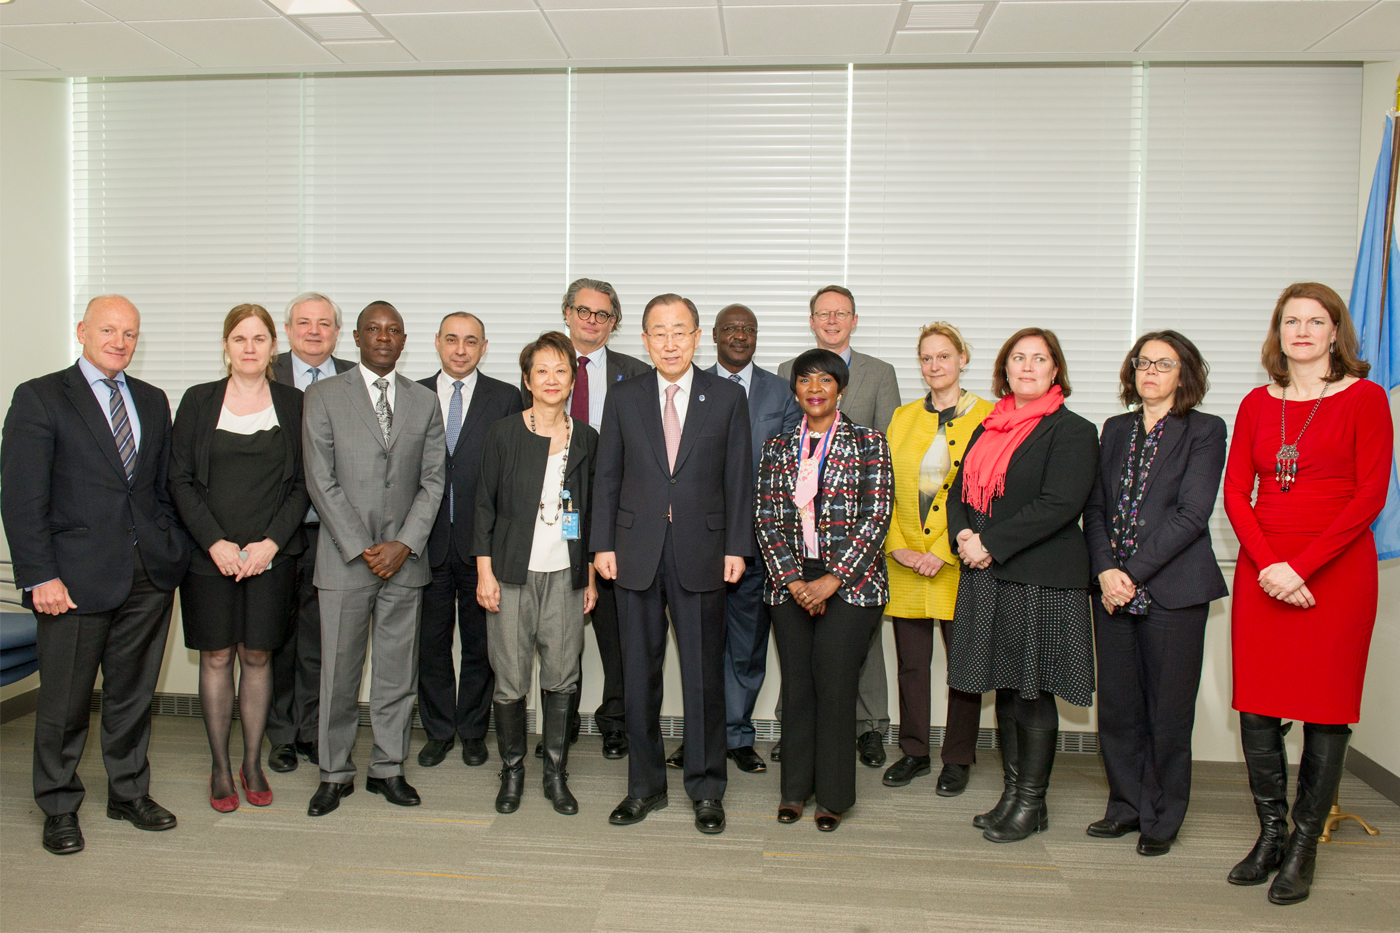 UN secretary-general appoints new members to global emergency fund's advisory group